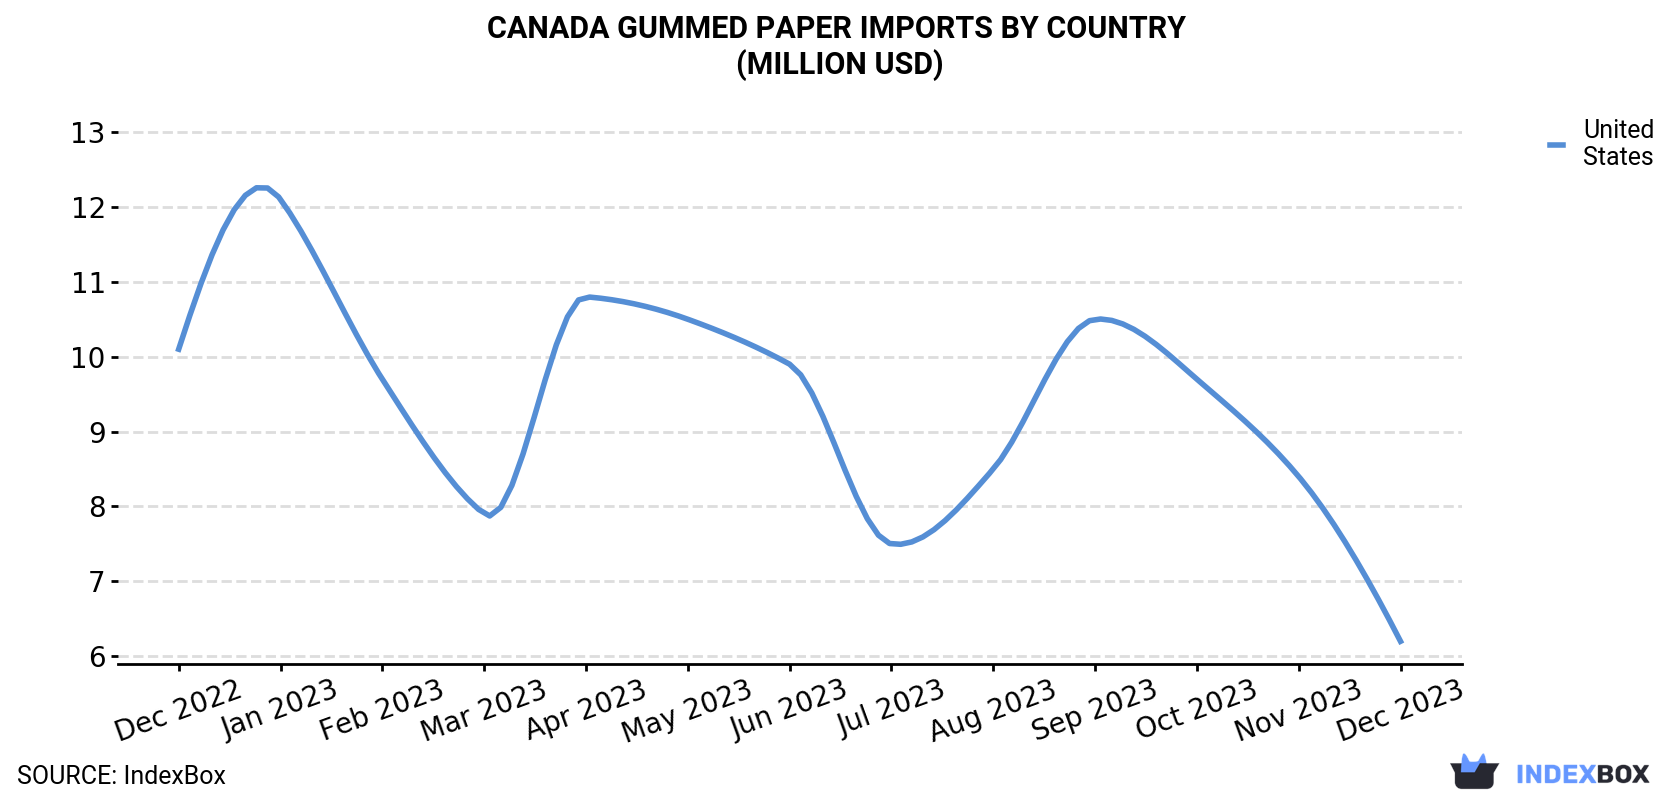 Canada Gummed Paper Imports By Country (Million USD)